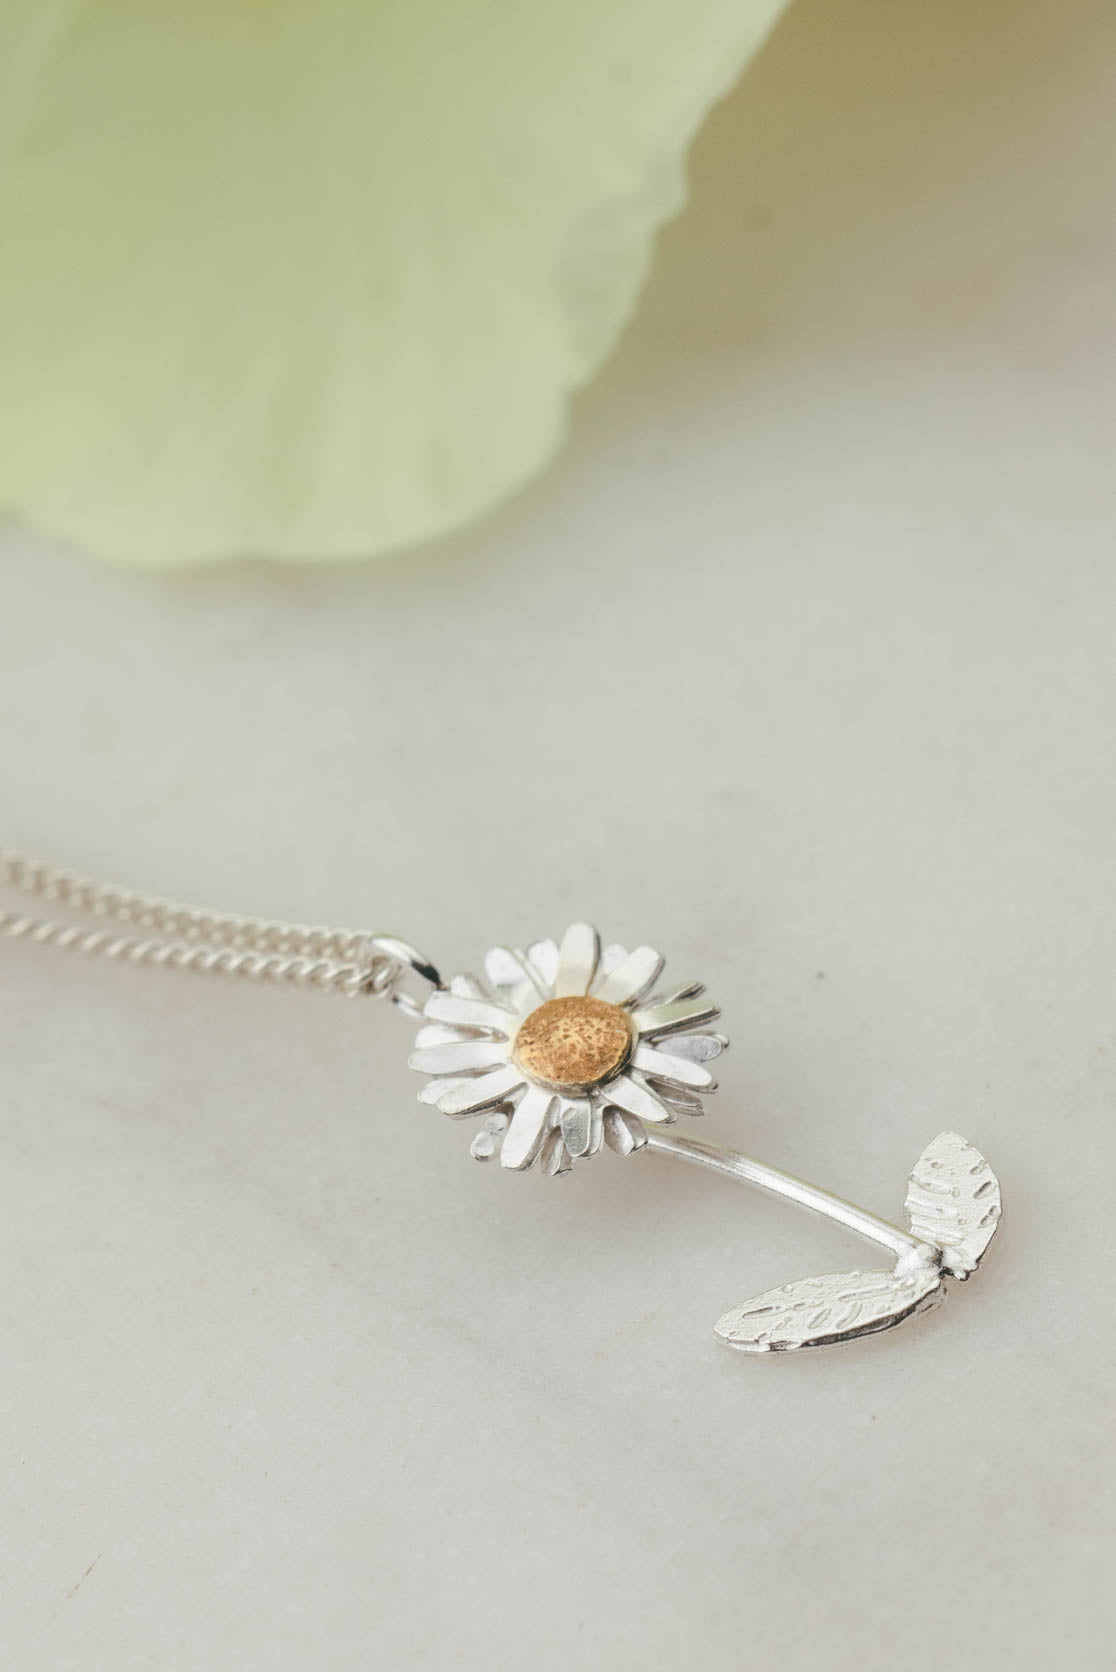 Daisy Flower Necklace, 5 Variations, Necklace, Flower Pendant Necklaces,  Plant Gifts, Daisy Chain (Pink Daisy Necklace) : Amazon.co.uk: Handmade  Products